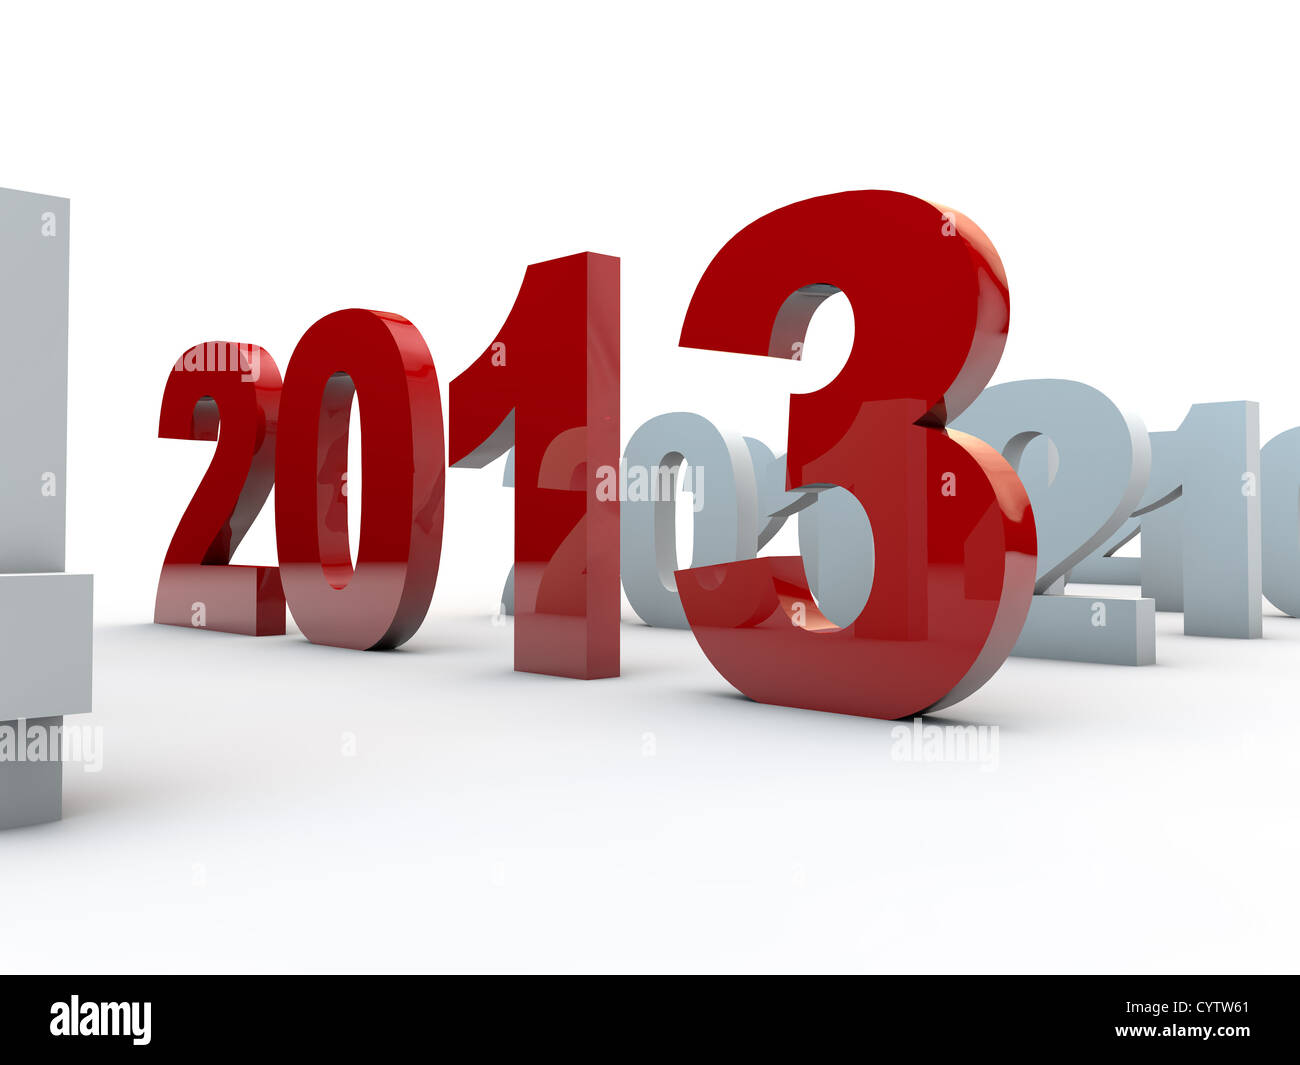 new year 2013 over white background Stock Photo